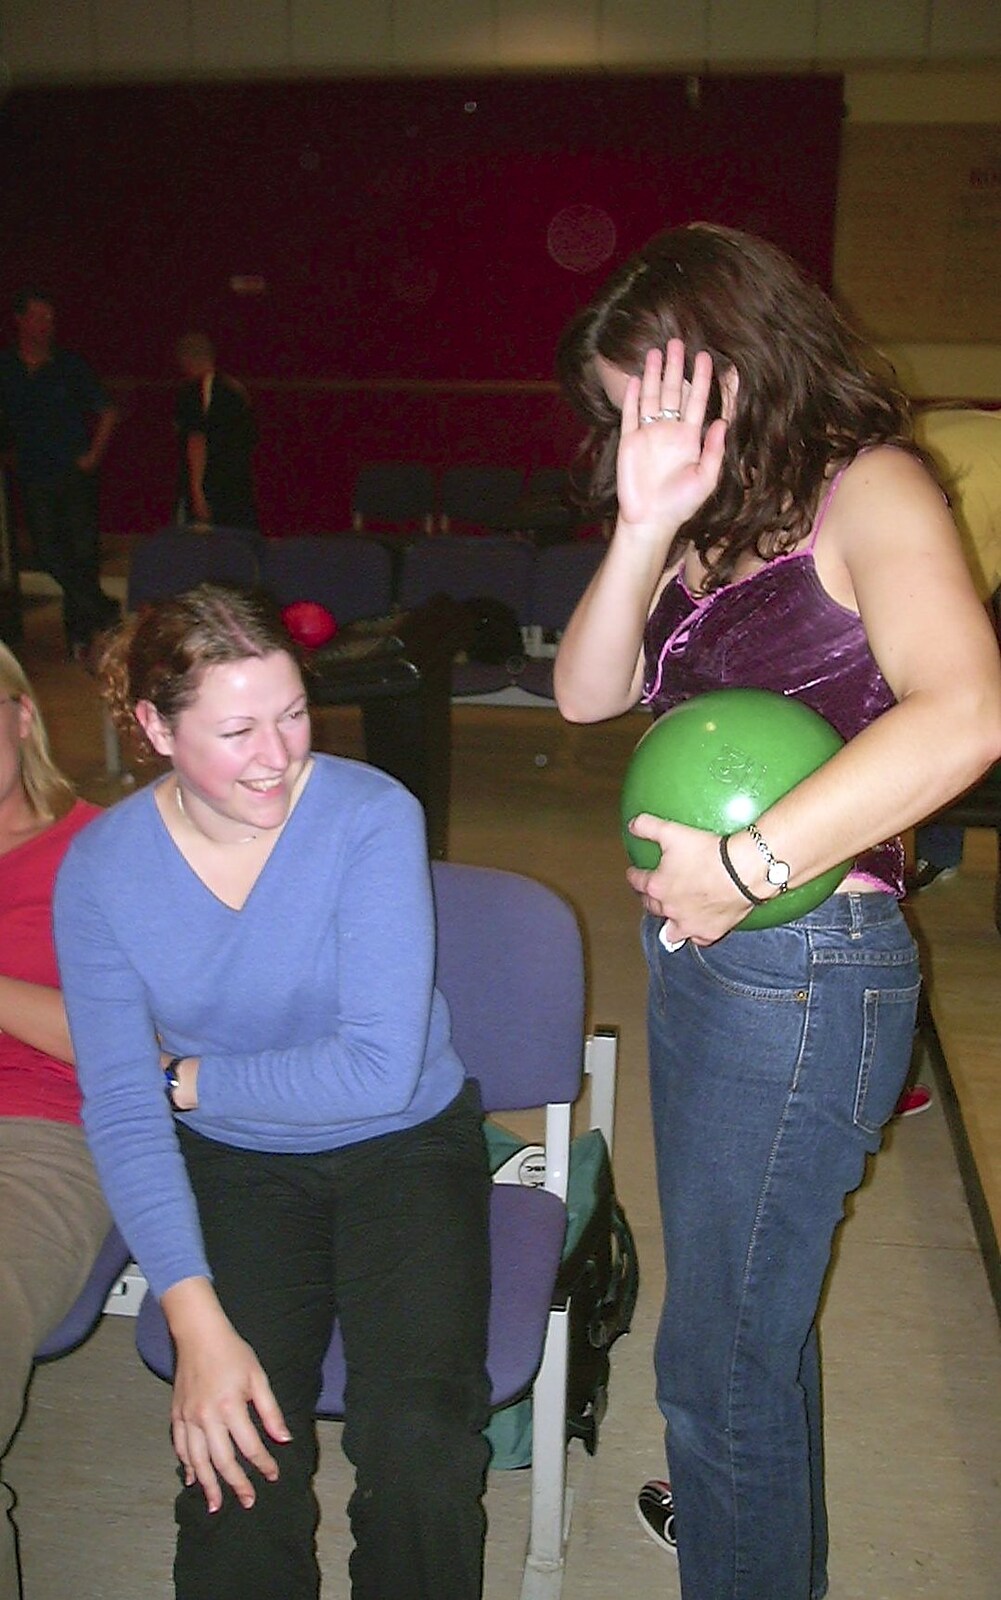 Lou and Clare from Ten Pin Bowling, Norwich, Norfolk - 13th September 2003